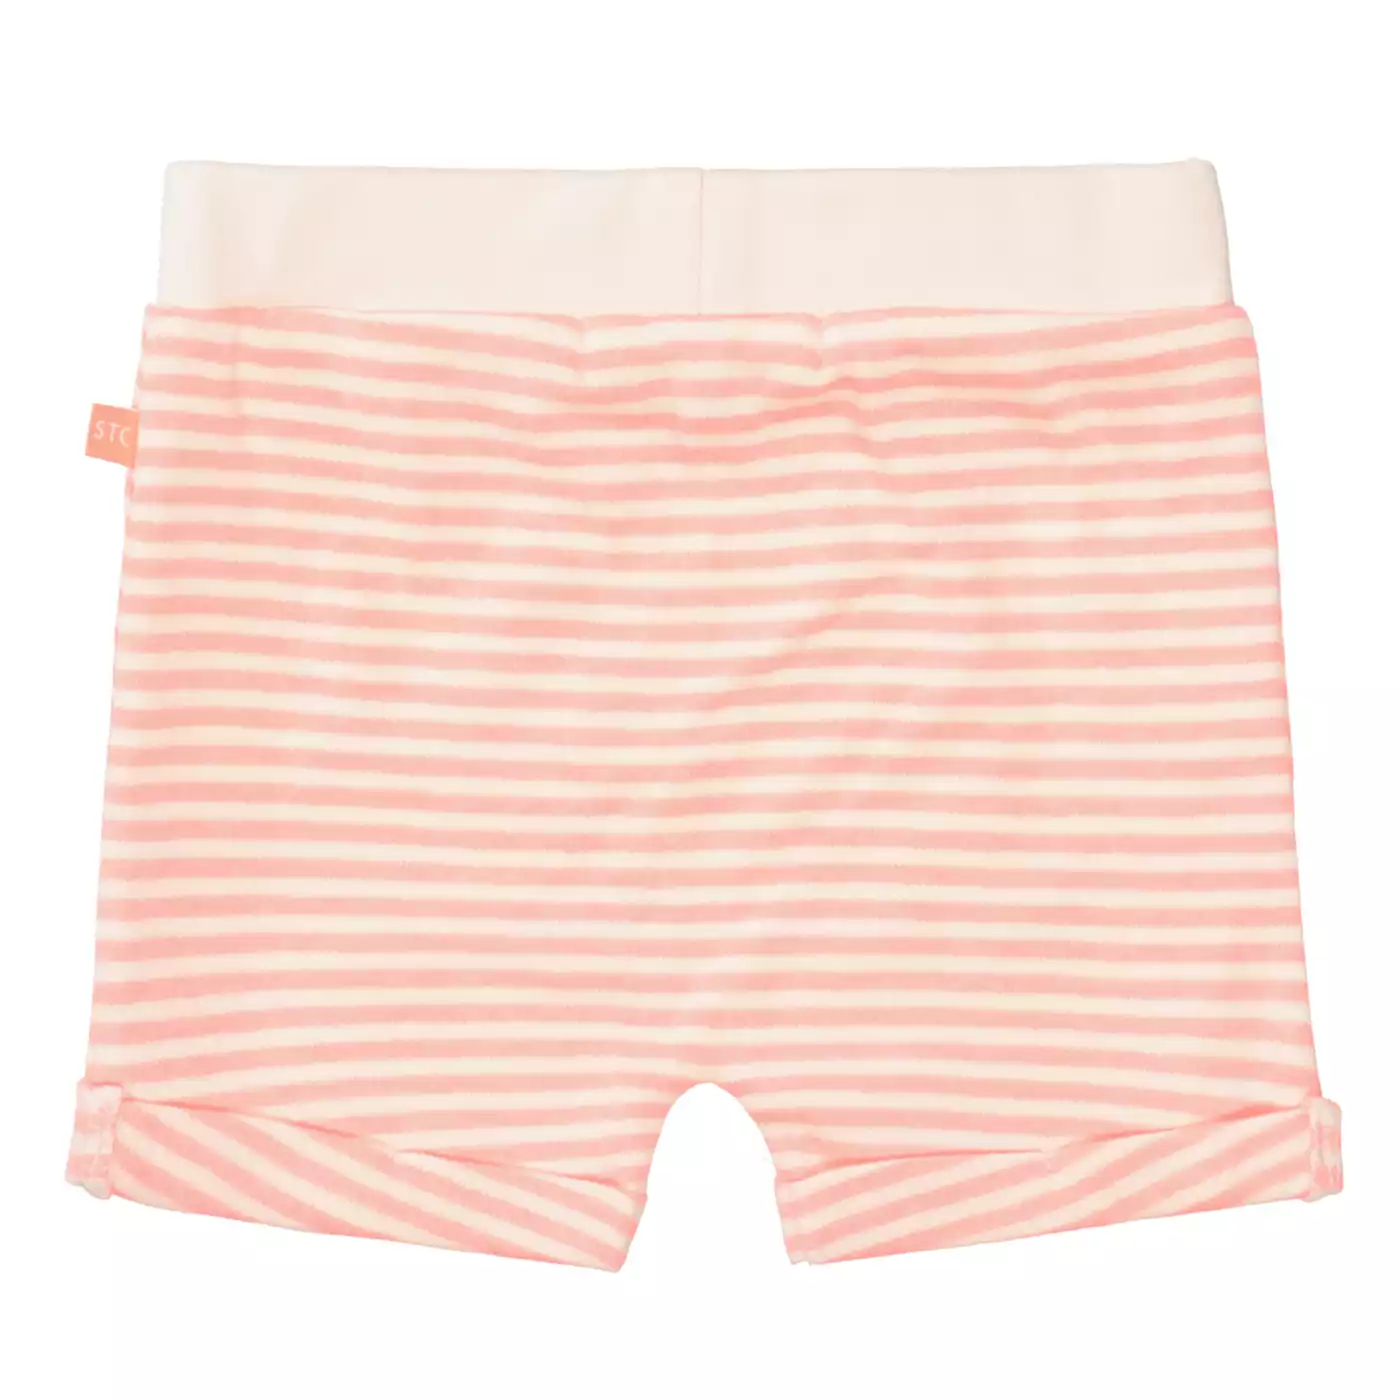 Shorts Neon Coral STACCATO Pink Rosa M2004580296103 4